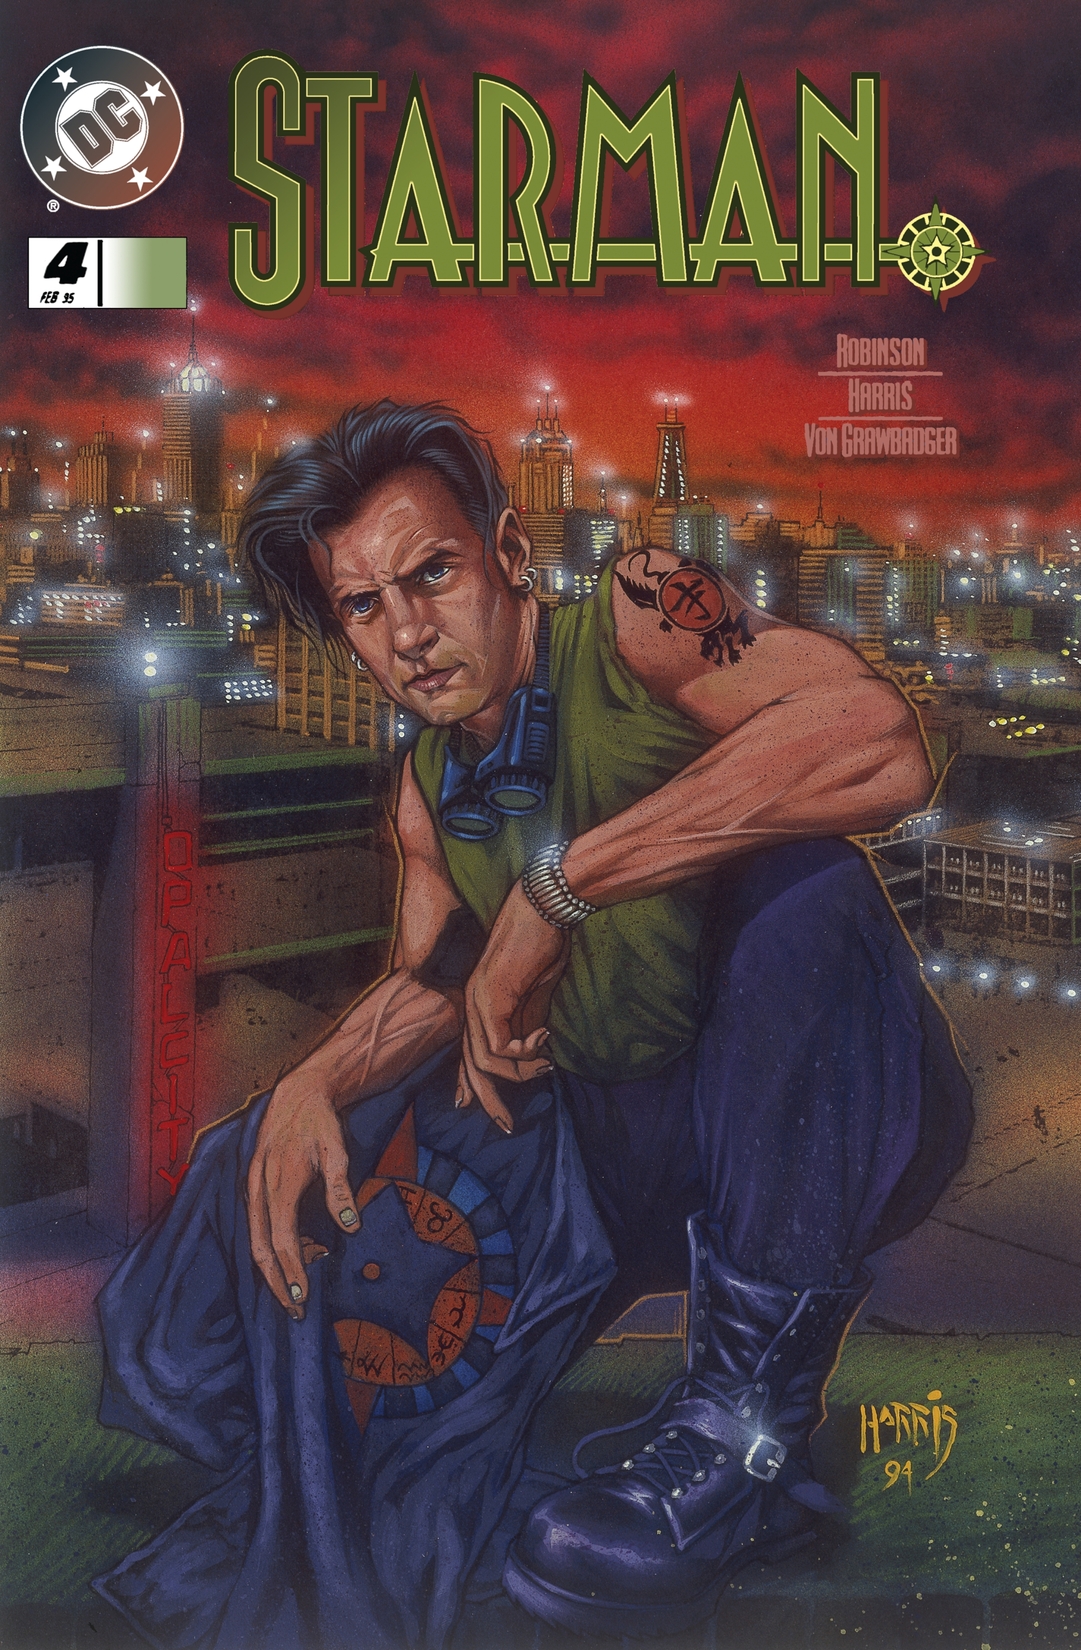 Starman (1994-) #4 preview images